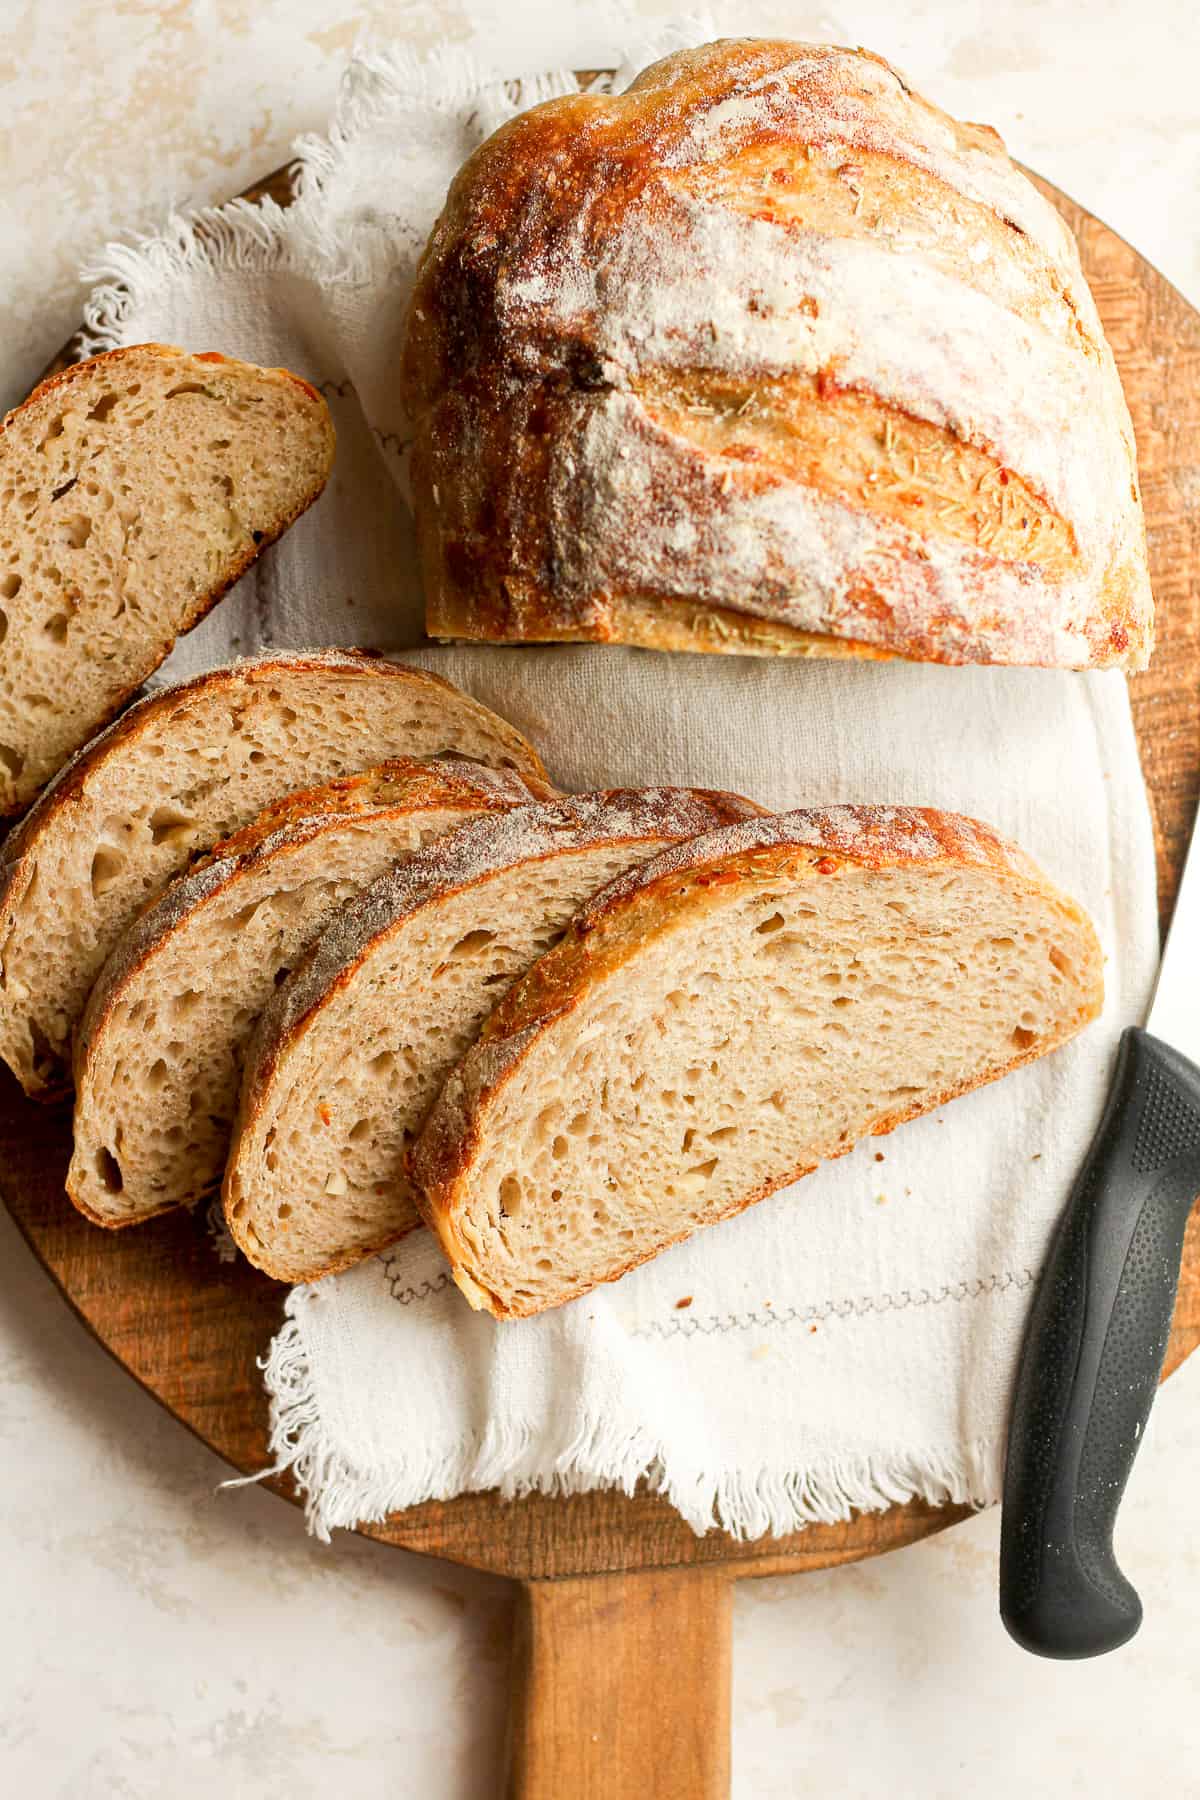 A round board with some sliced sourdough and a partial loaf, with a knife.